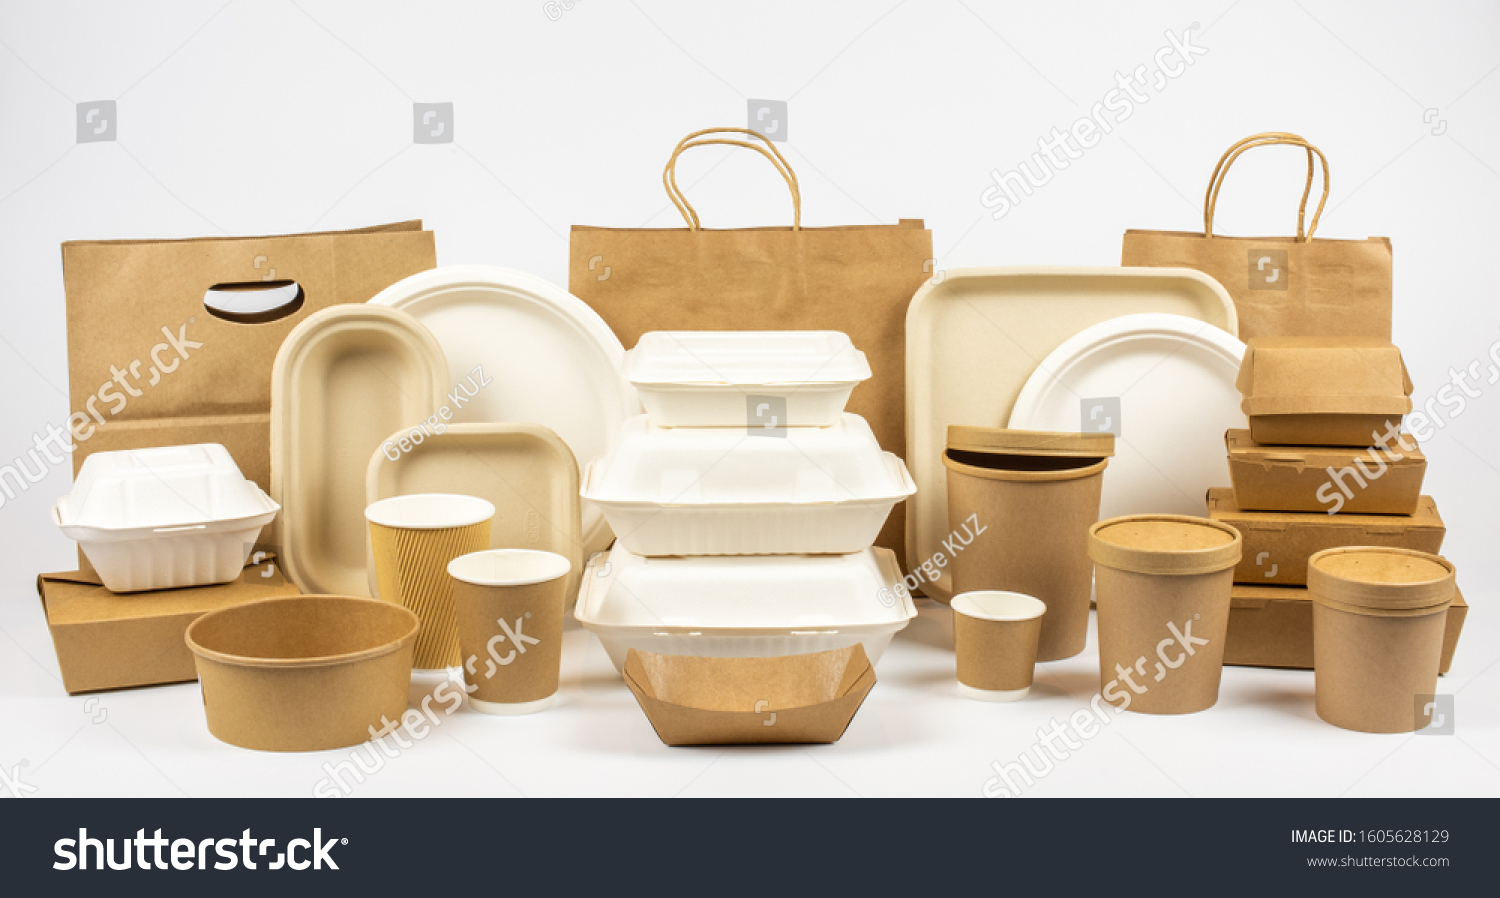 Group shot of biodegradable and recyclable food packaging on white background, paper plates, cups, containers, bags, no logos #1605628129